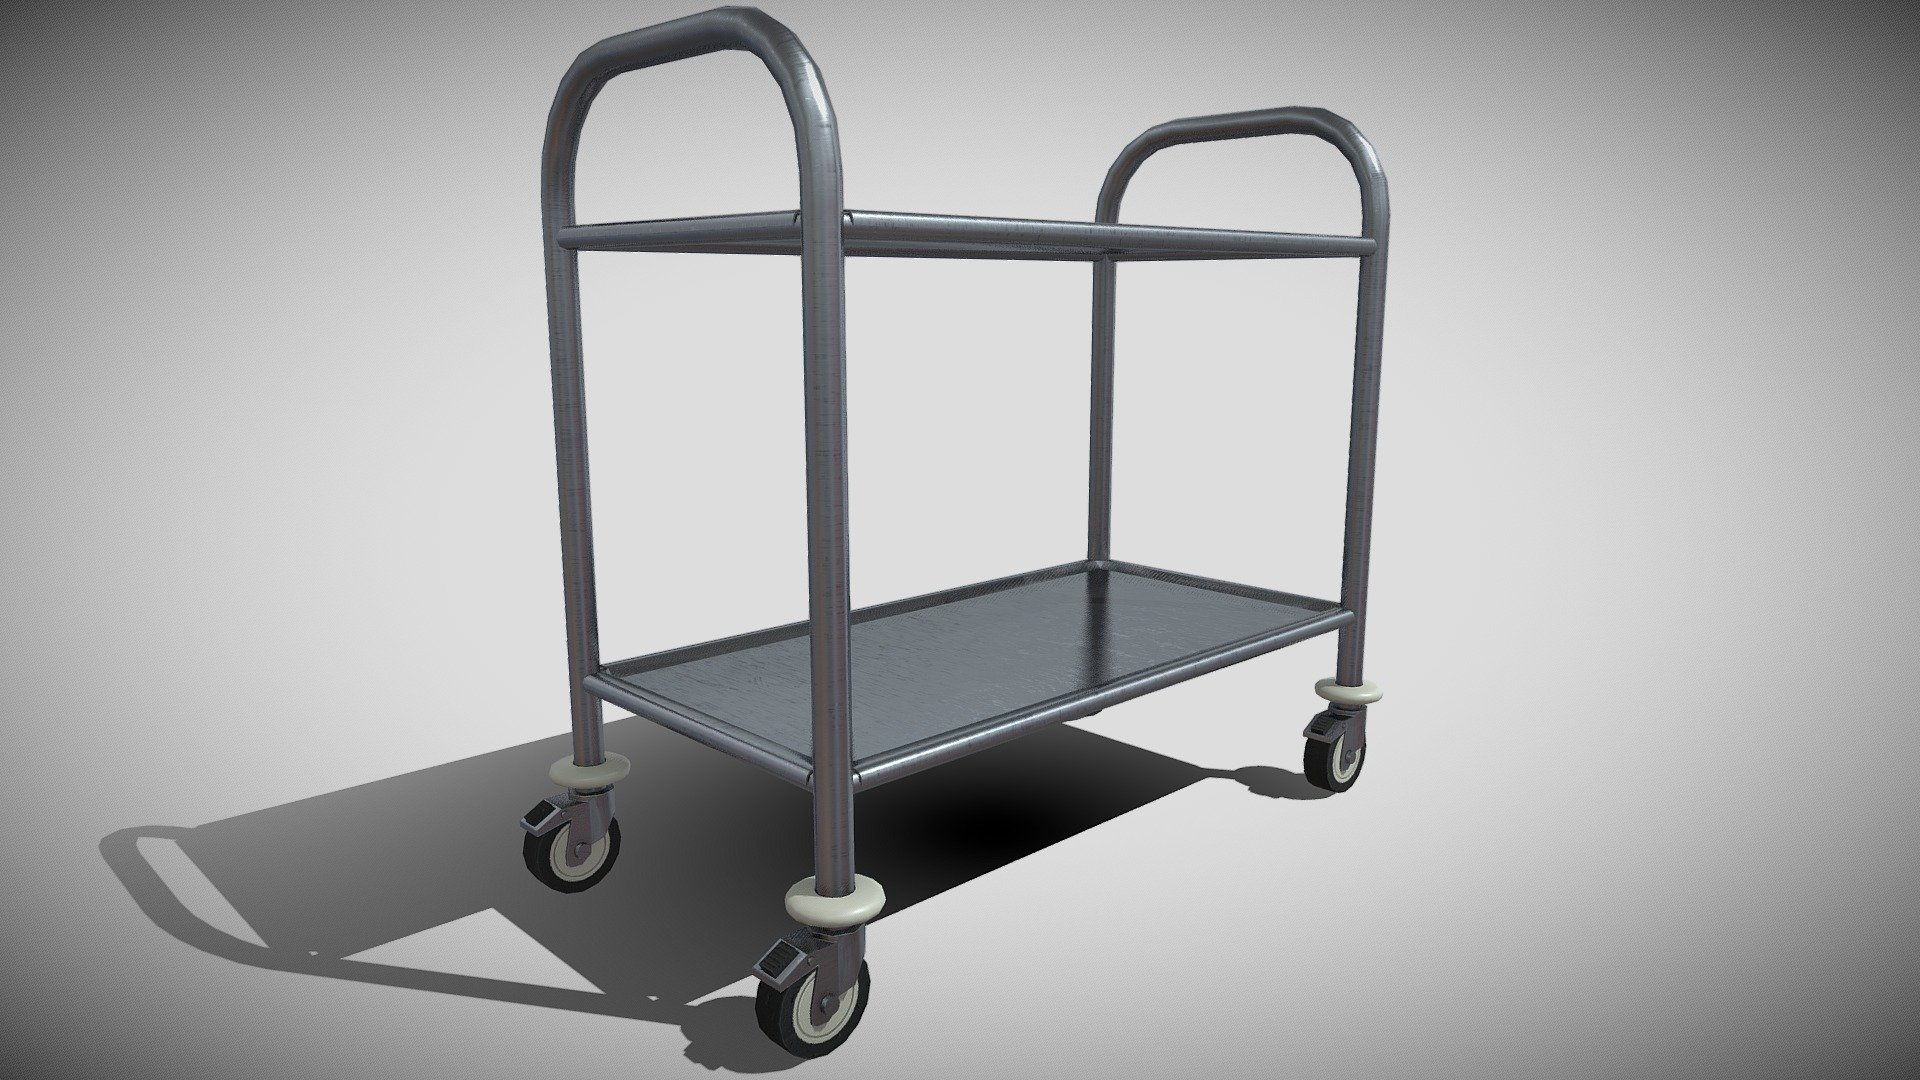 Simple trolley asset for use in scenes.
Low poly / pbr

Available on my Cgtrader - Trolley - 3D model by Chrismartinartist 3d model